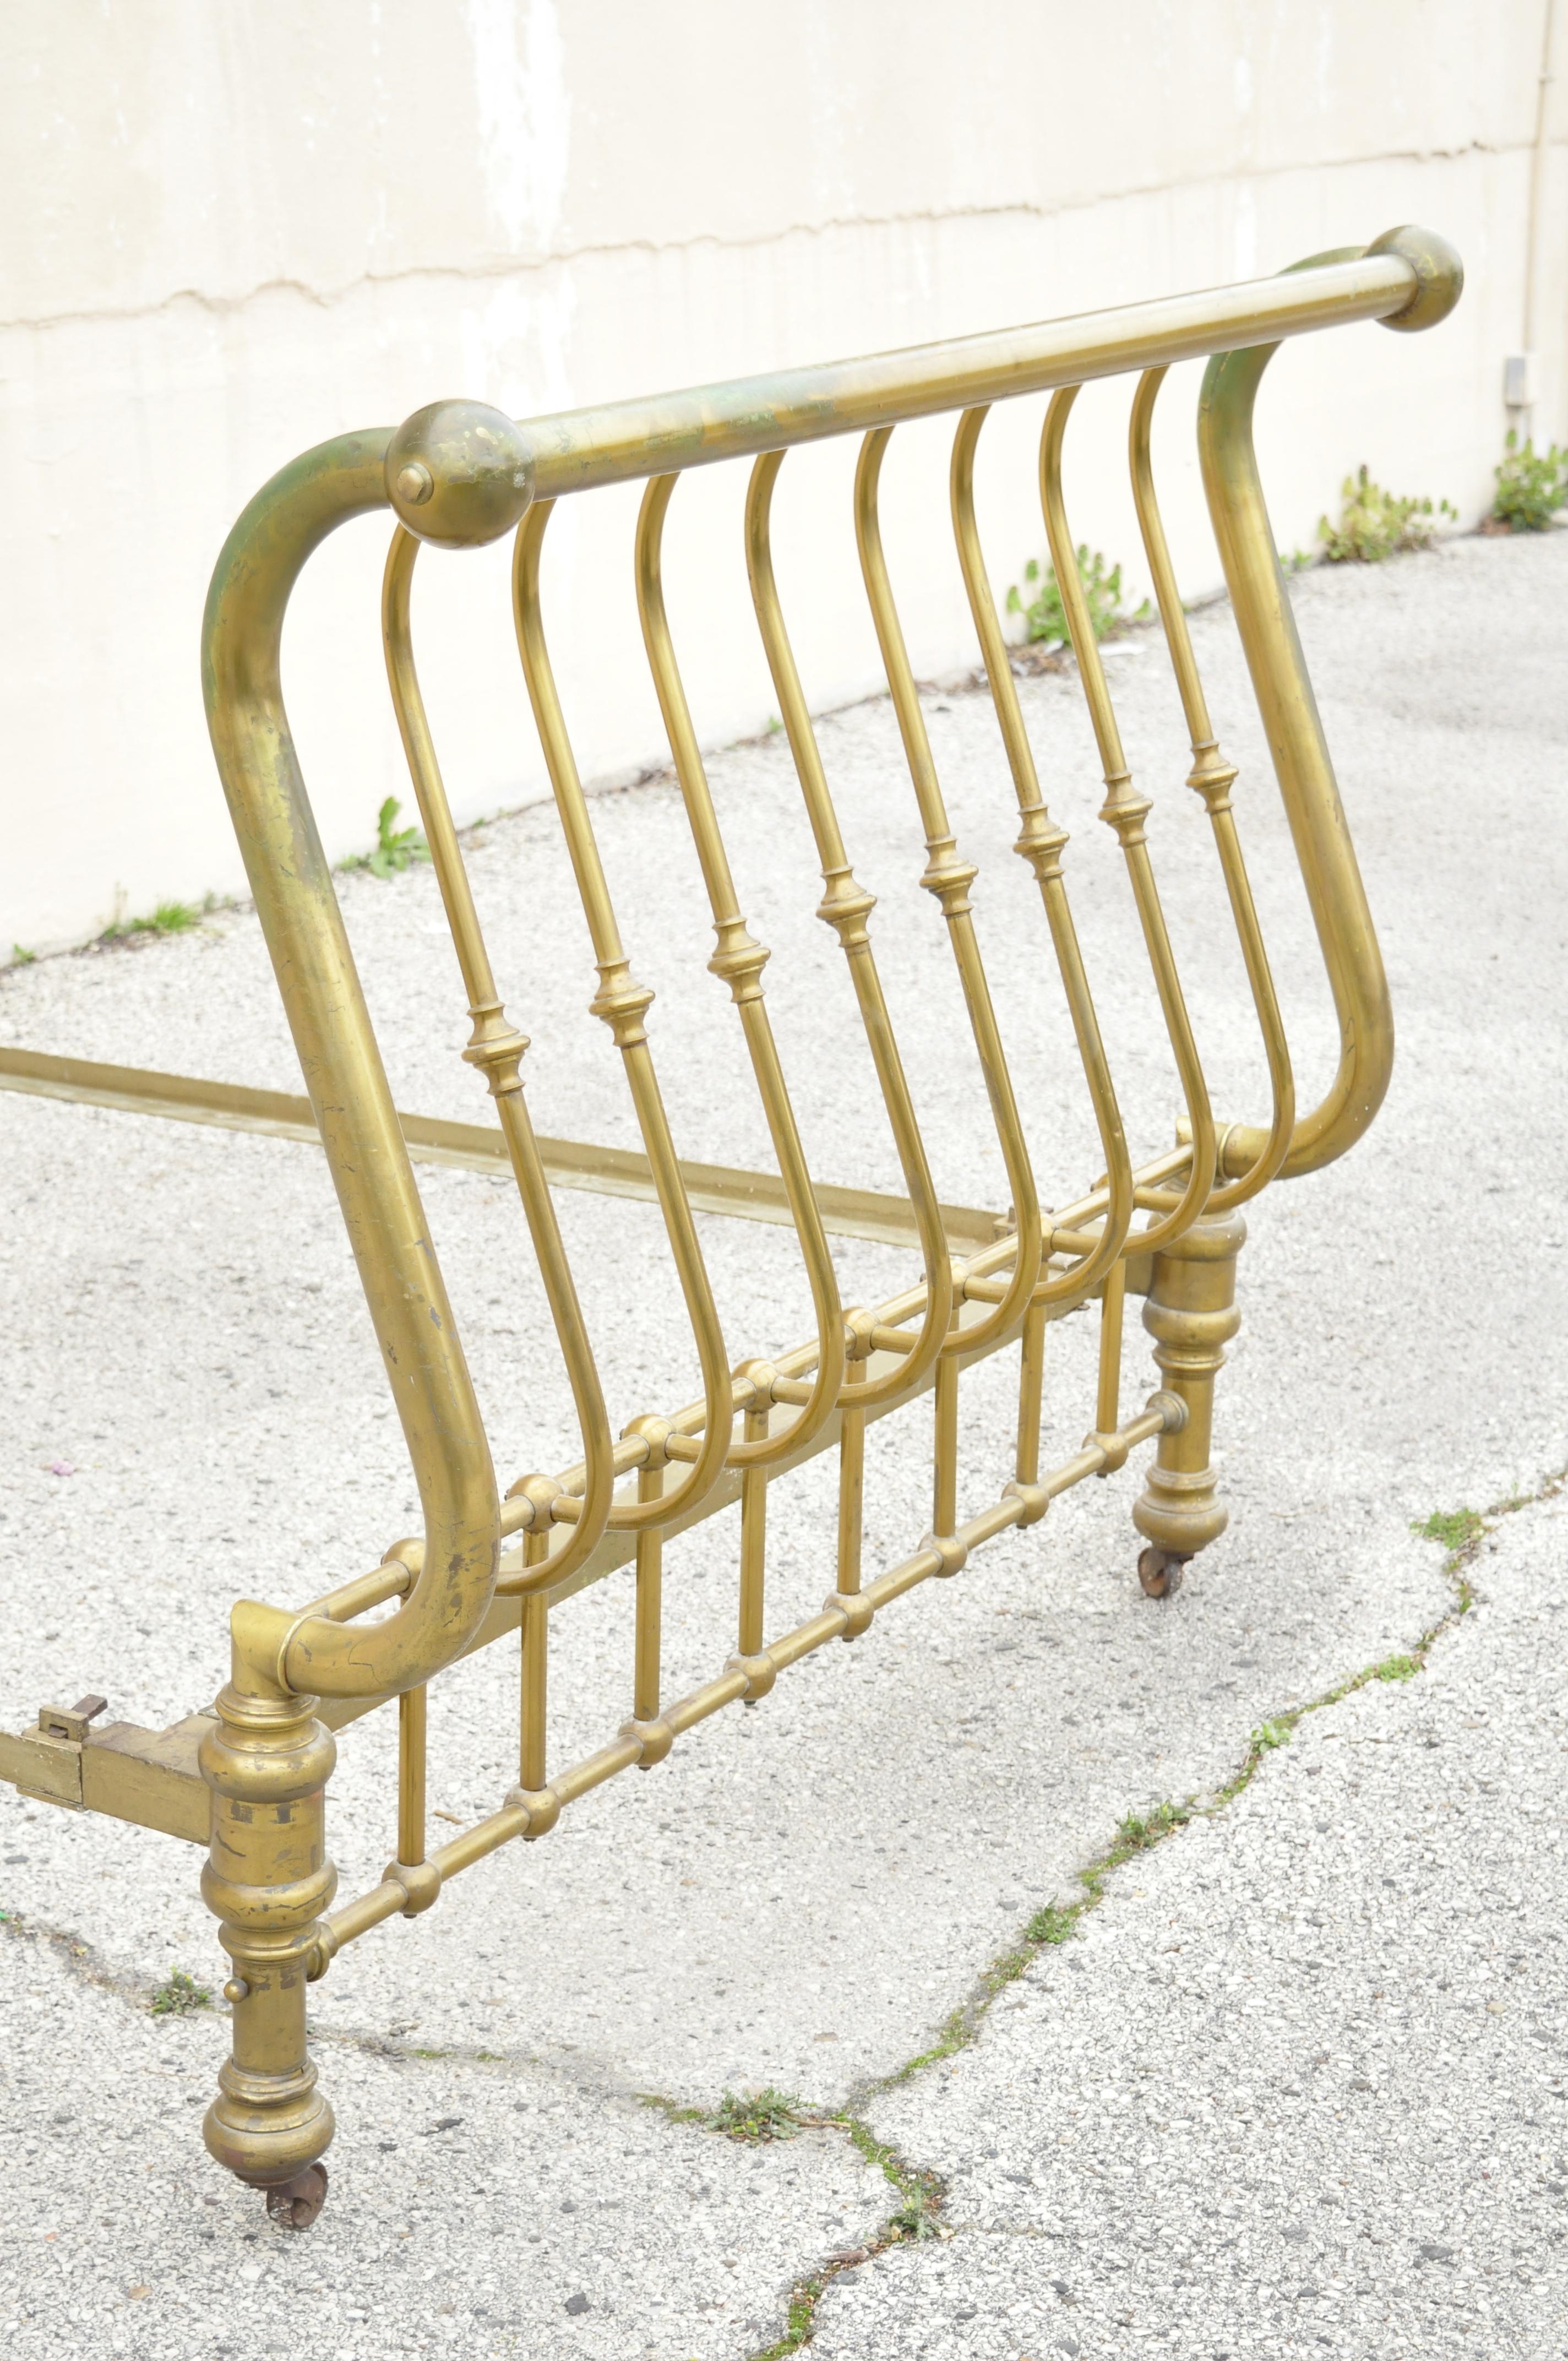 North American Antique Victorian Full Size Gold Brass Sleigh Bed w Cast Iron Rails, Marked 1908